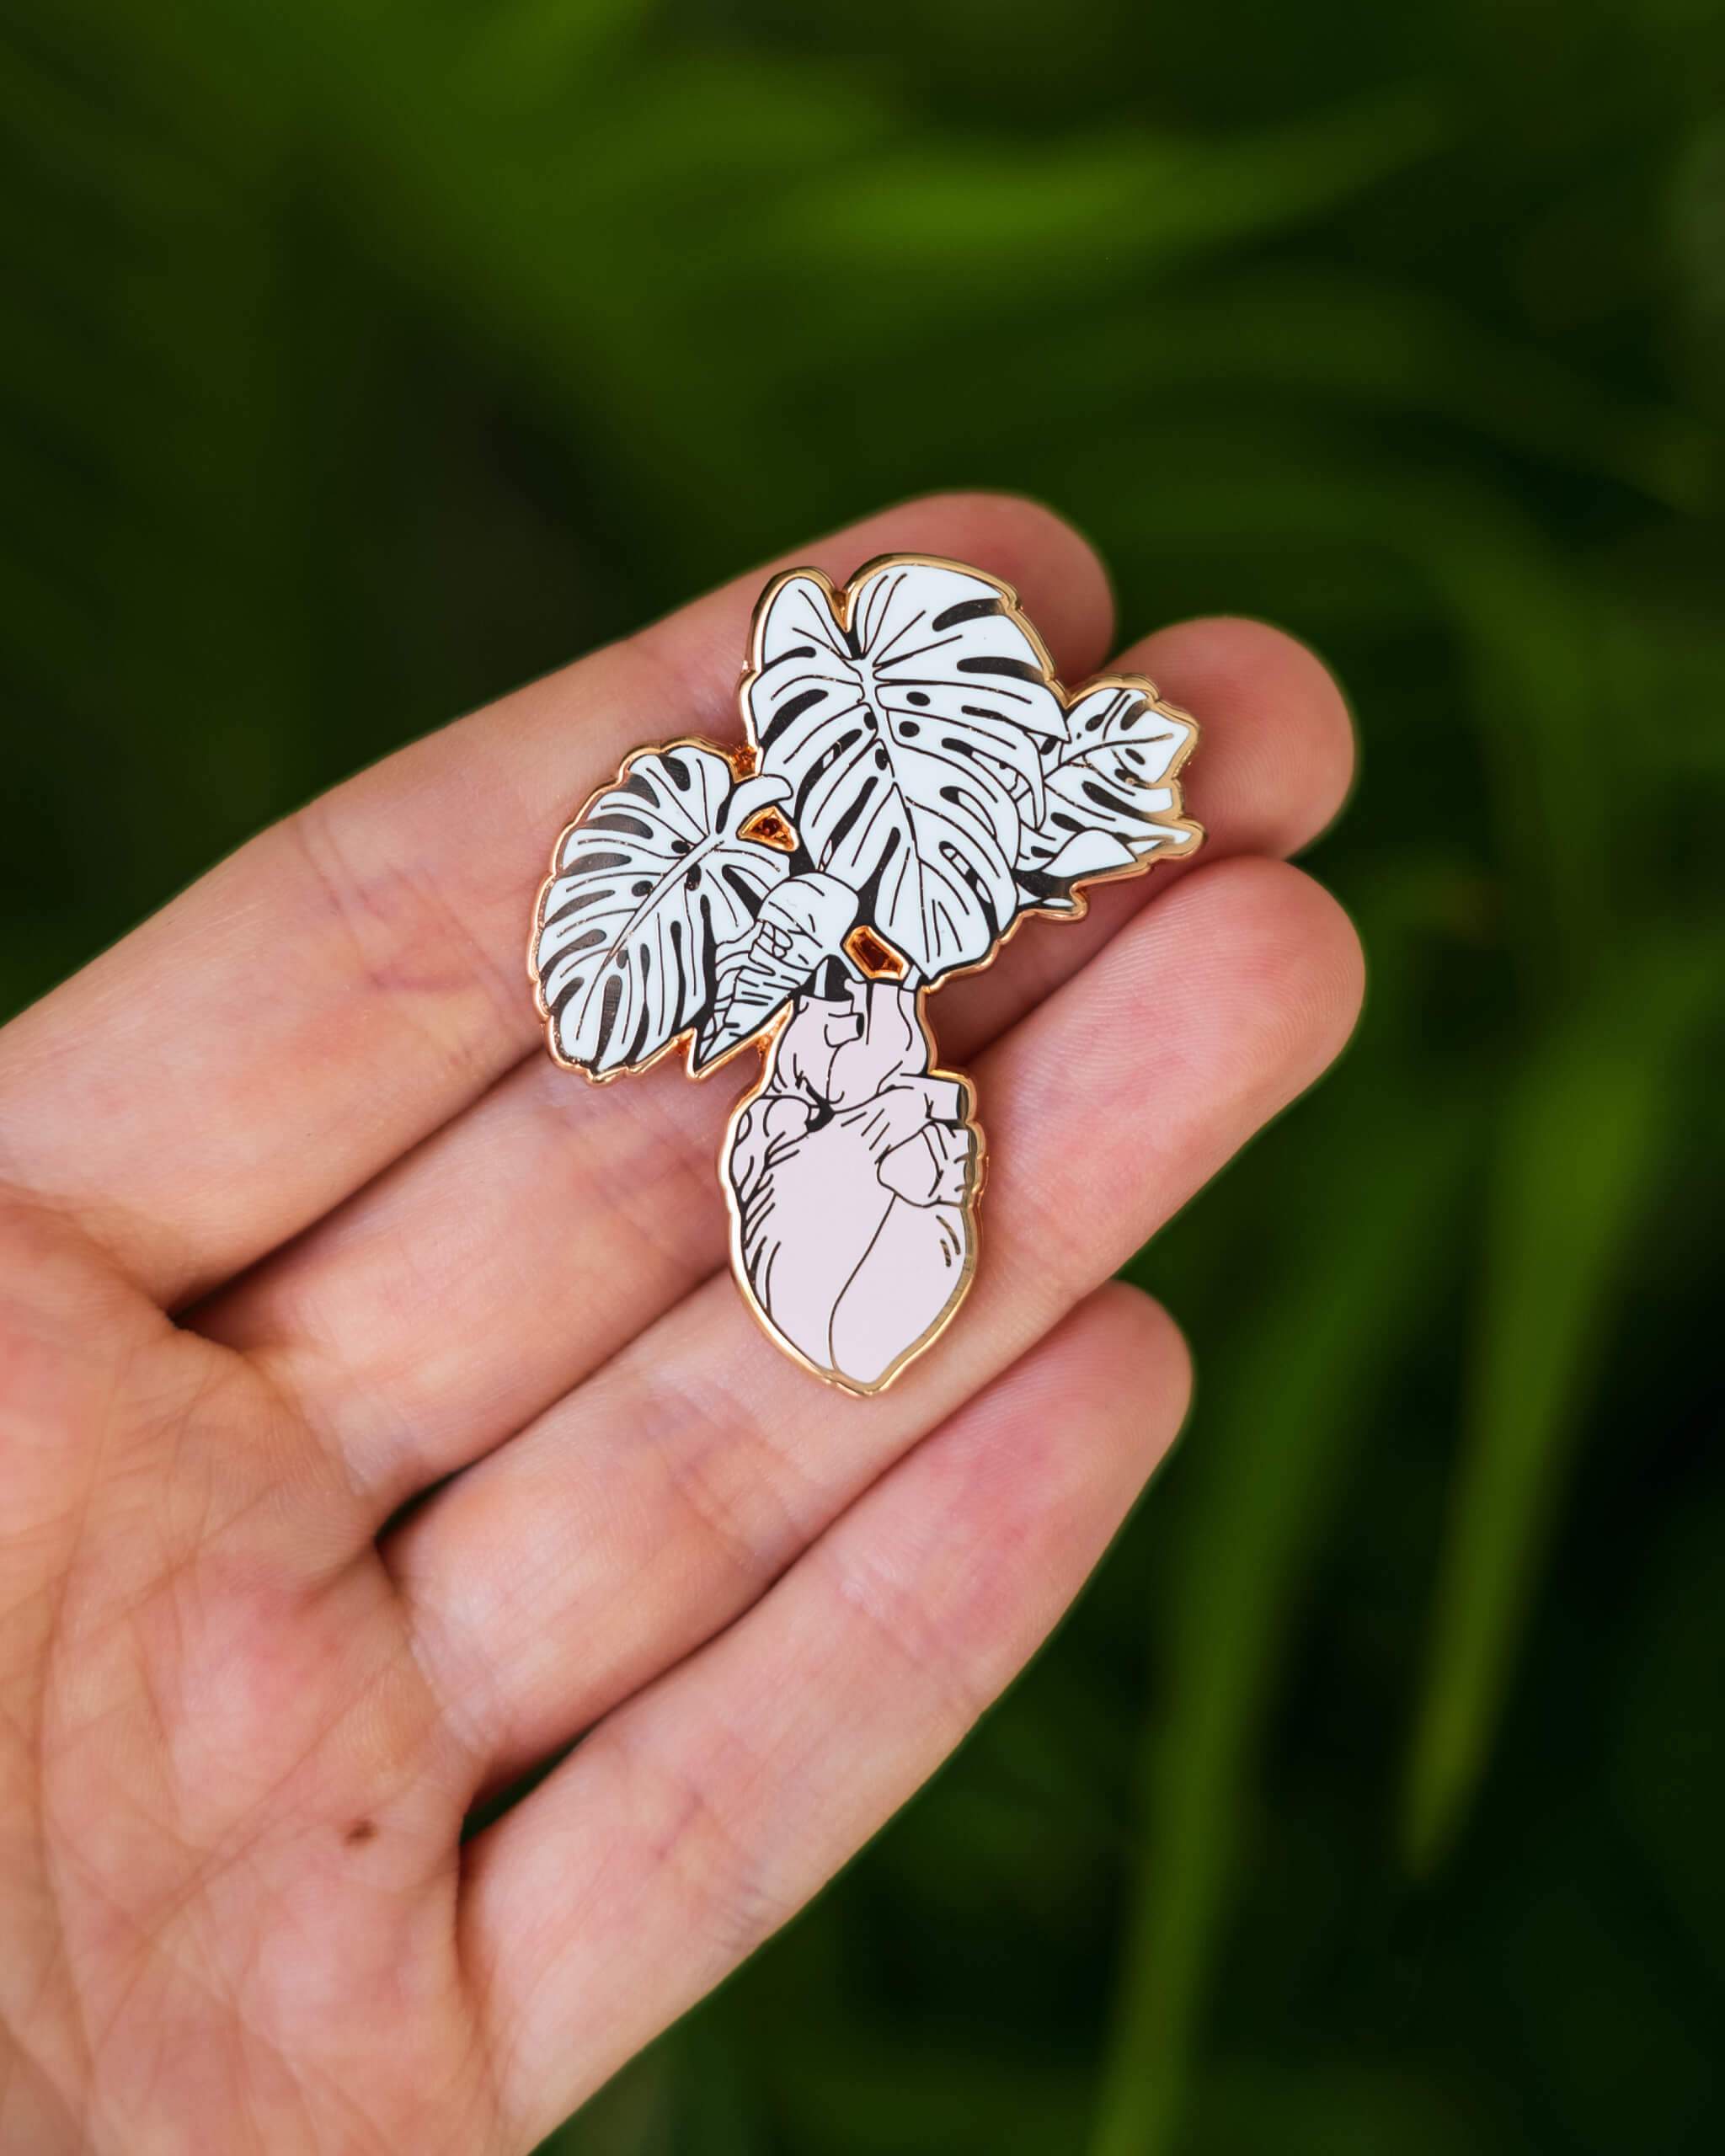 Gift Guide: Enamel lapel pins for plant lovers